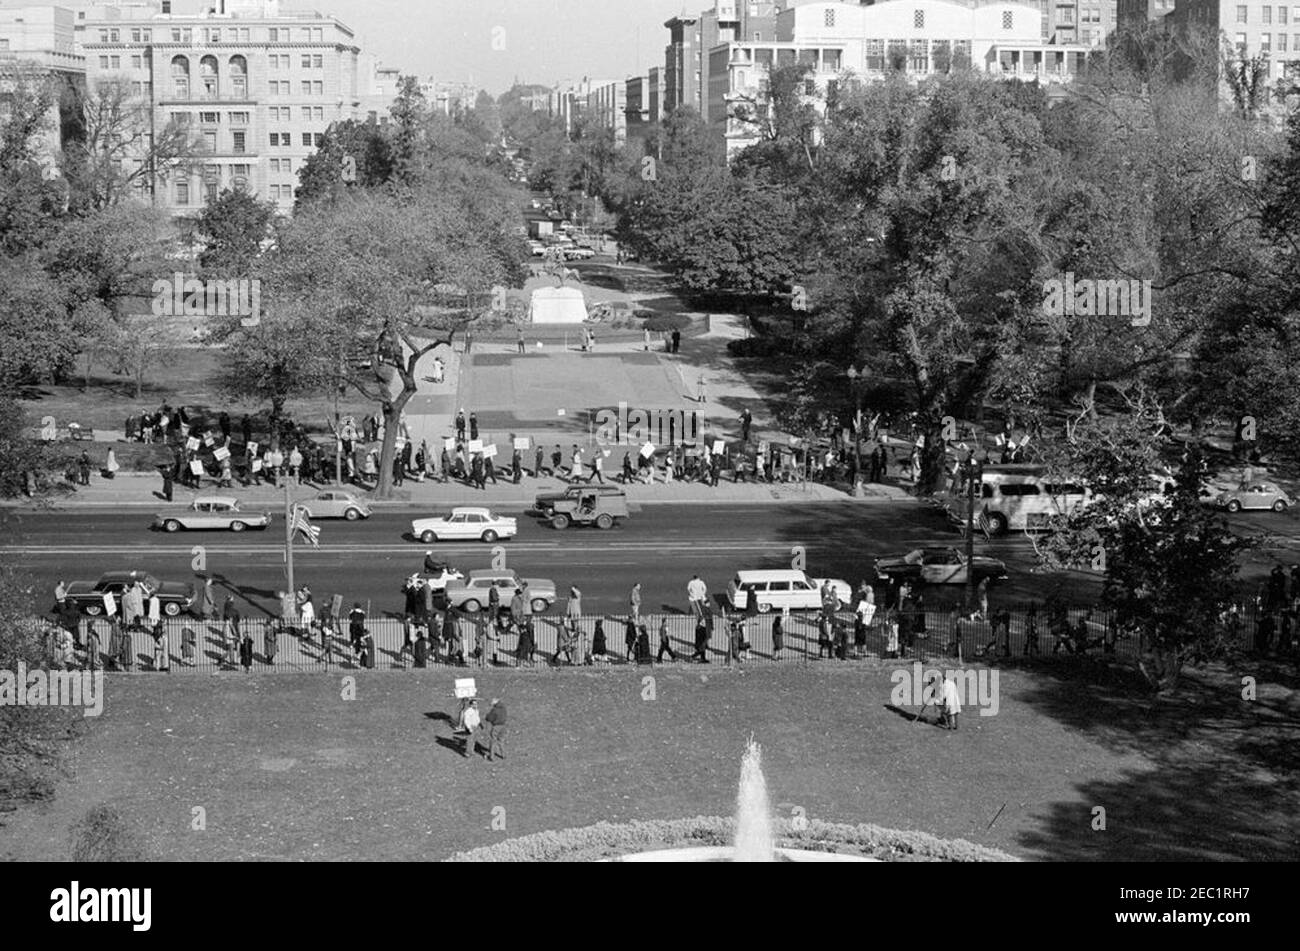 Demonstrators at the White House. View of demonstrators picketing along Pennsylvania Avenue in Washington, D.C., in response to the crisis in Cuba. The North Lawn of the White House is in the foreground; Lafayette Square is visible in the background. Stock Photo